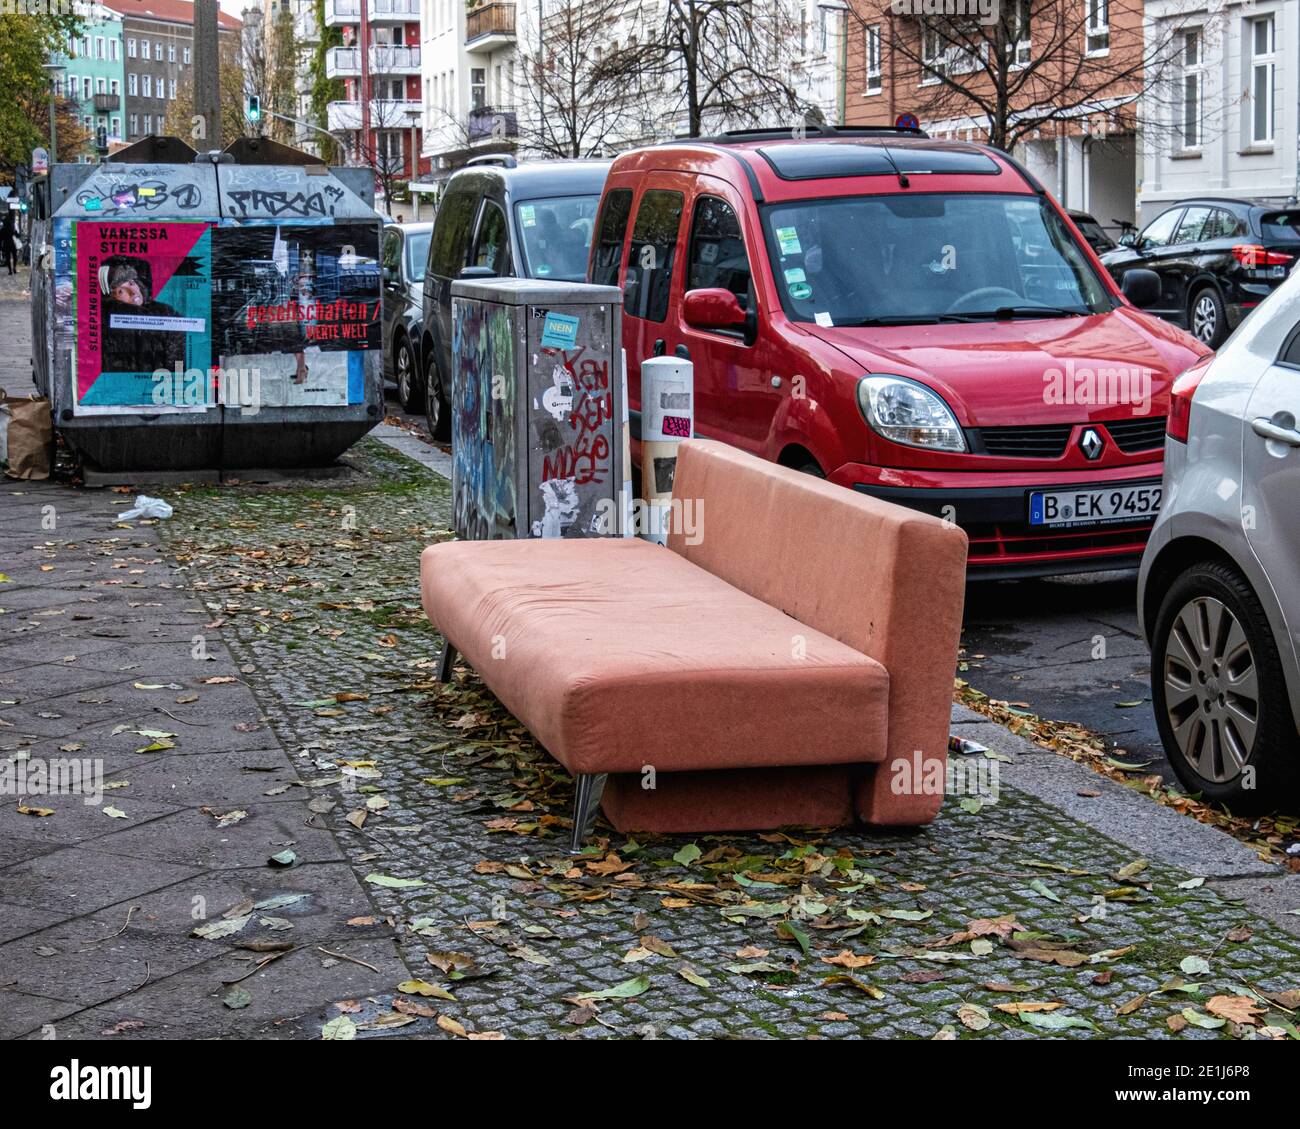 Pink sofa bed, couch, abandoned & dumped on an urban pavement,Prenzlauer Berg ,Berlin, Germany Stock Photo